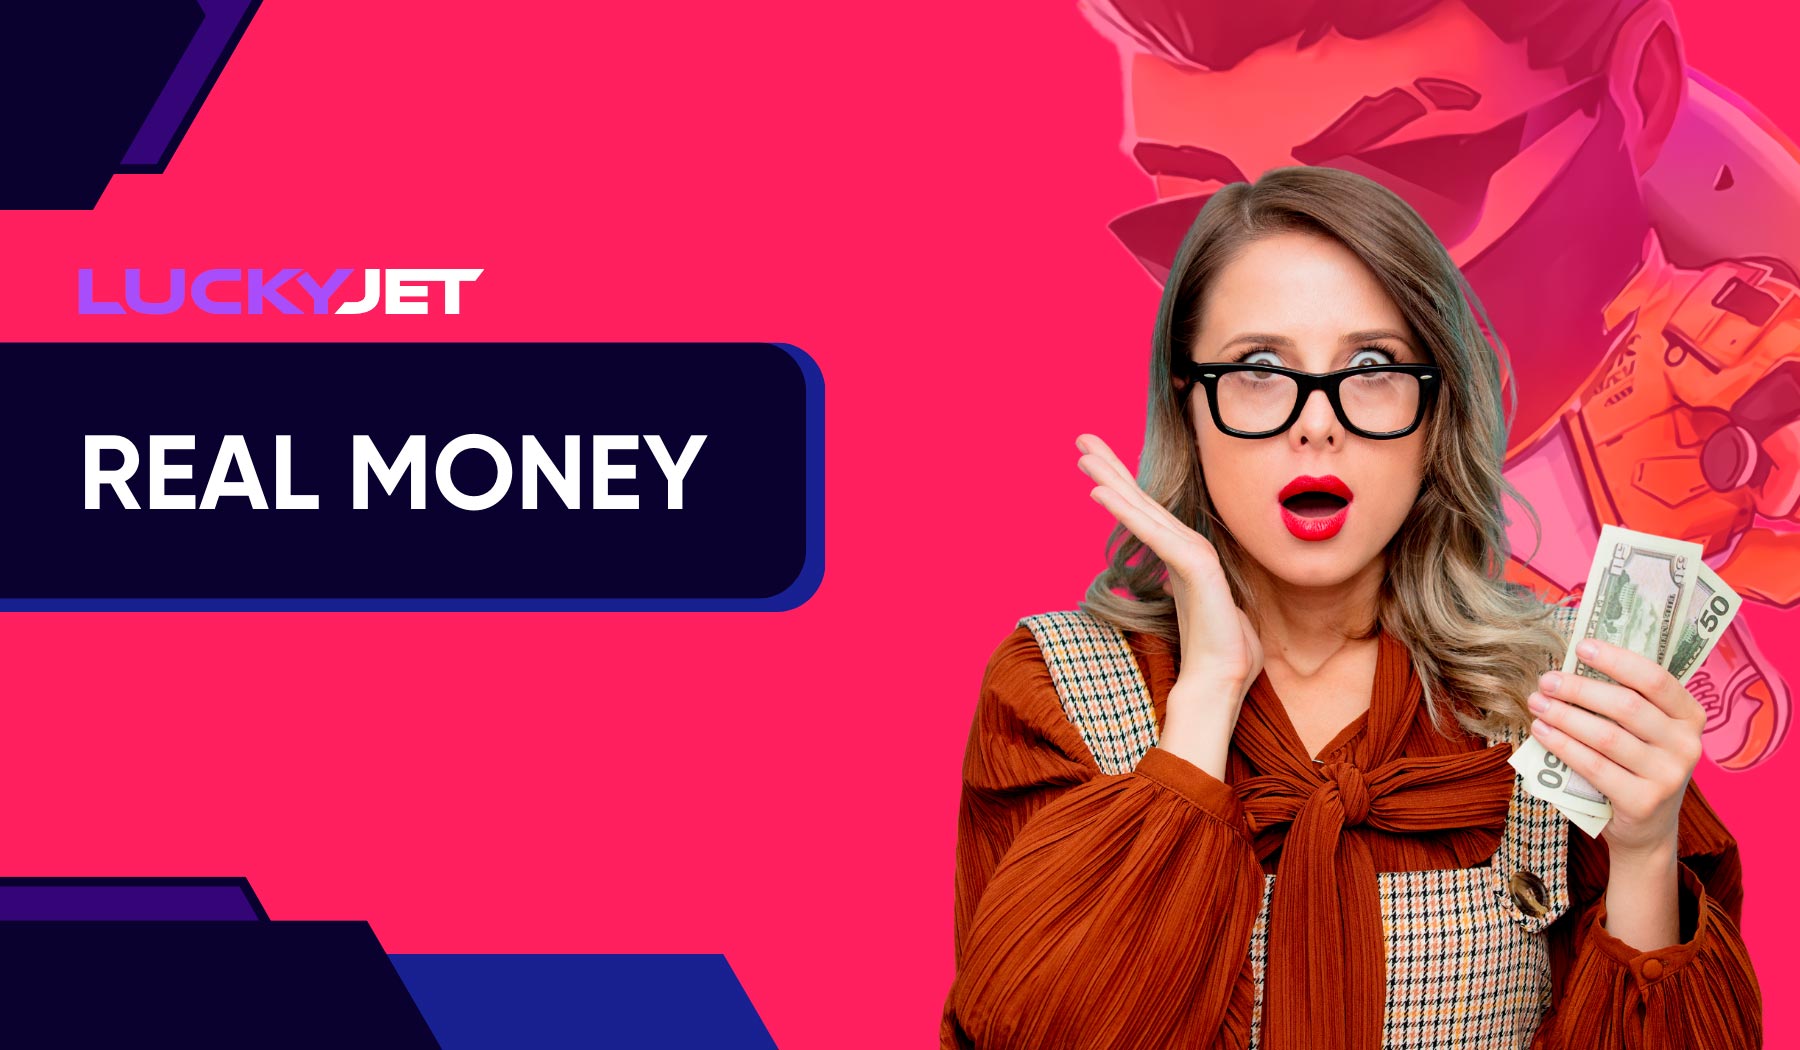 Play Real Money Lucky Jet on the App - Become a Registered User